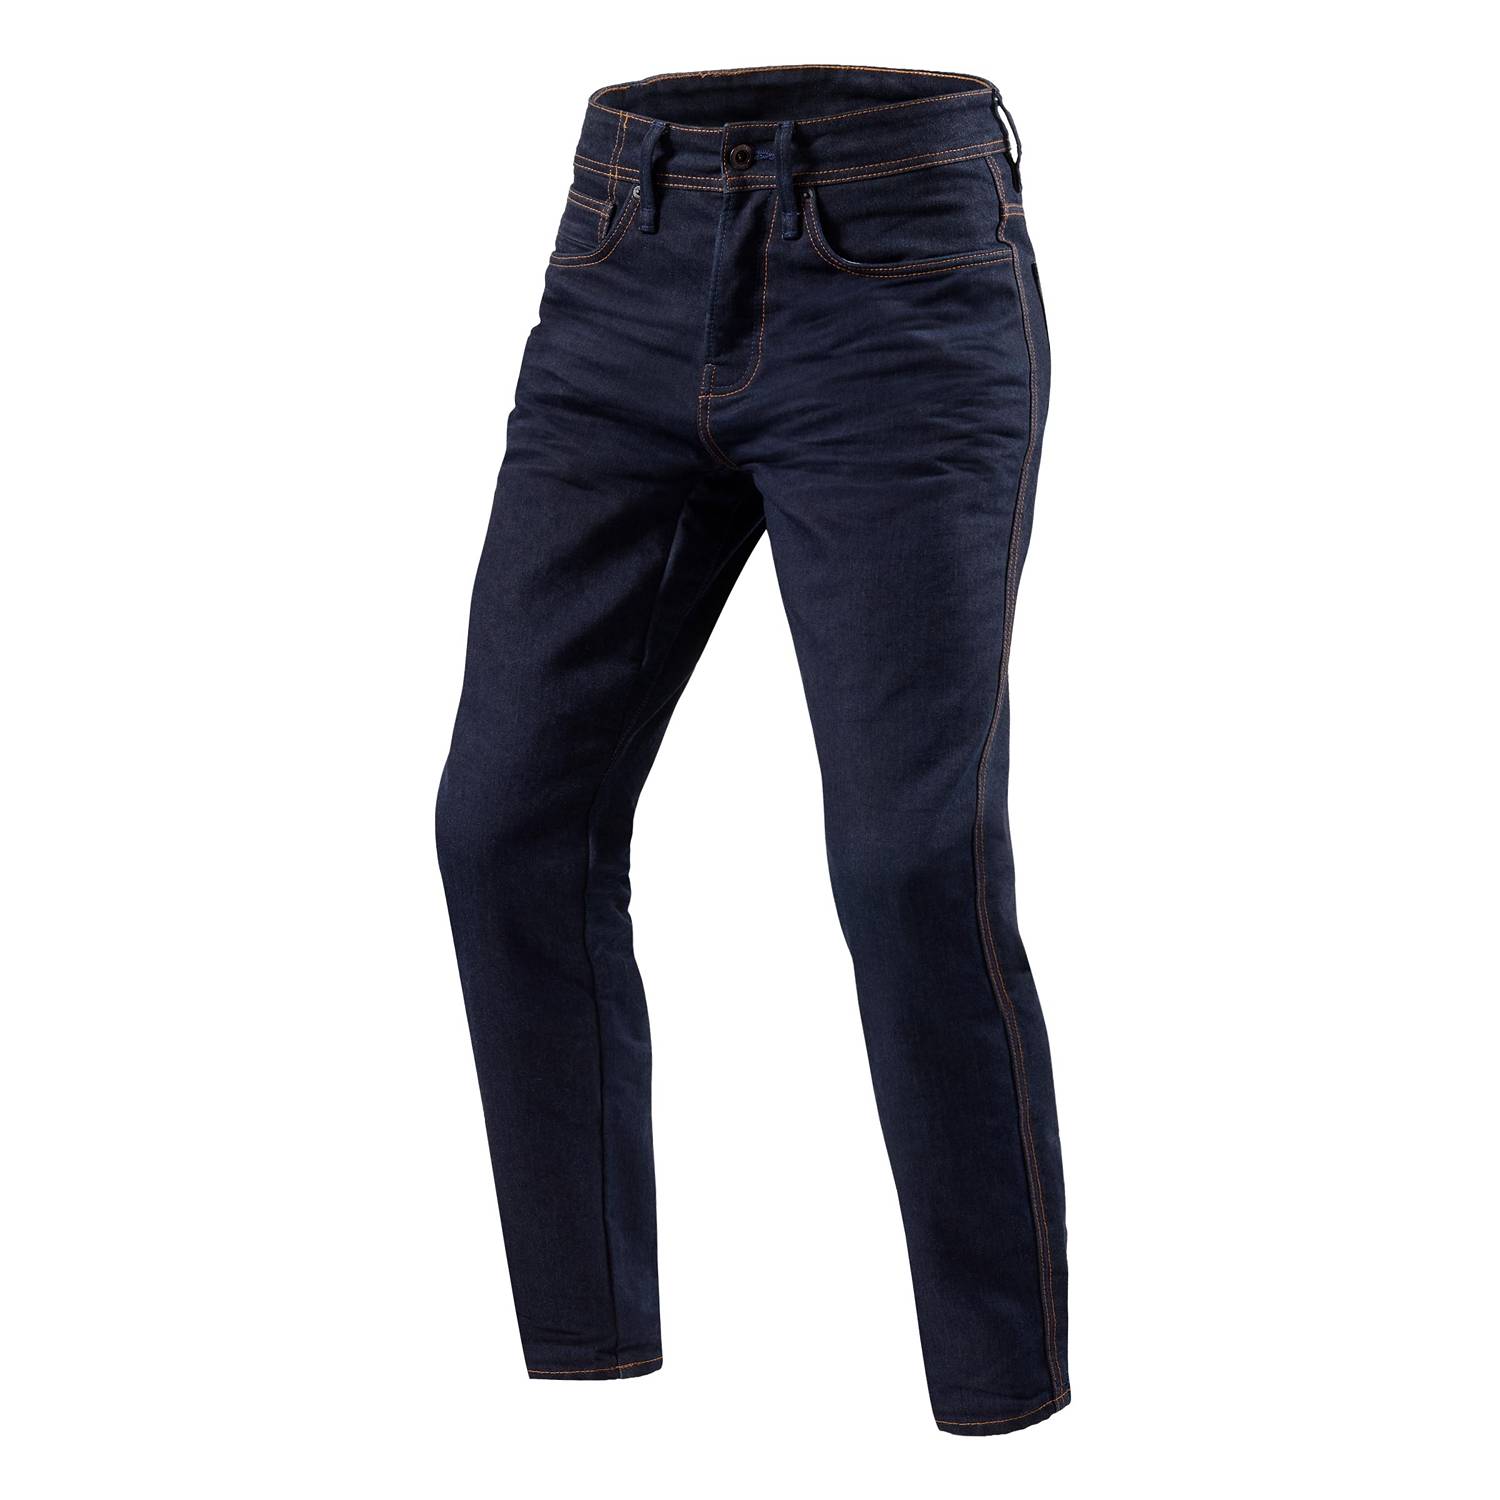 Image of REV'IT! Jeans Reed RF Dark Blue Used Motorcycle Jeans Size L34/W32 ID 8700001336901